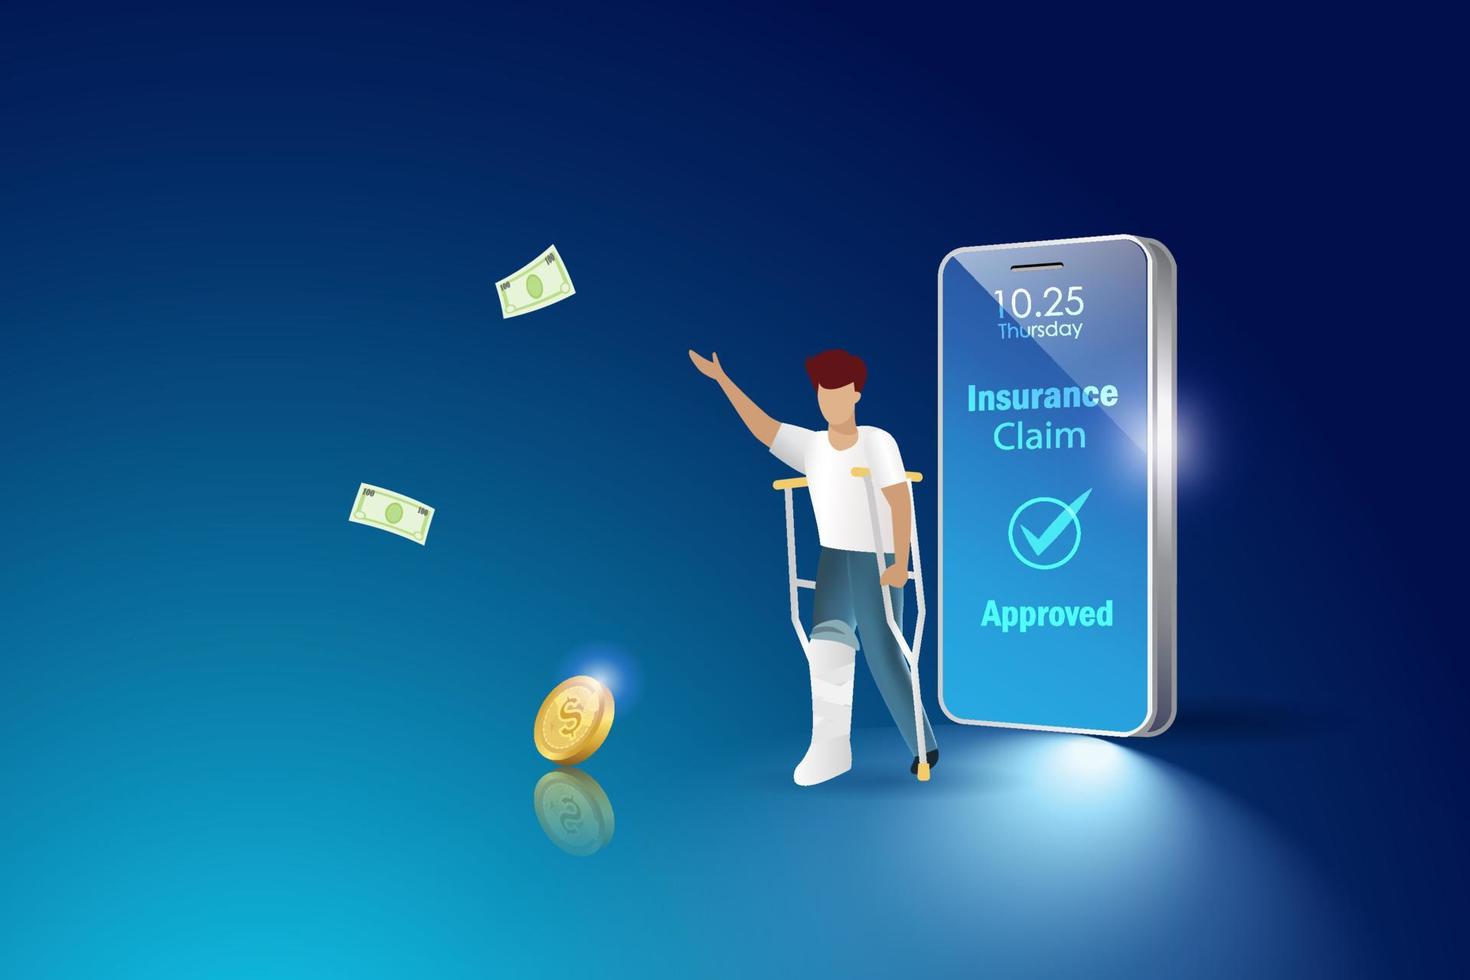 Health, accident insurance claim approved on smartphone. Happy broken leg man with money from insurance claim. Life insurance protect family health and life. vector